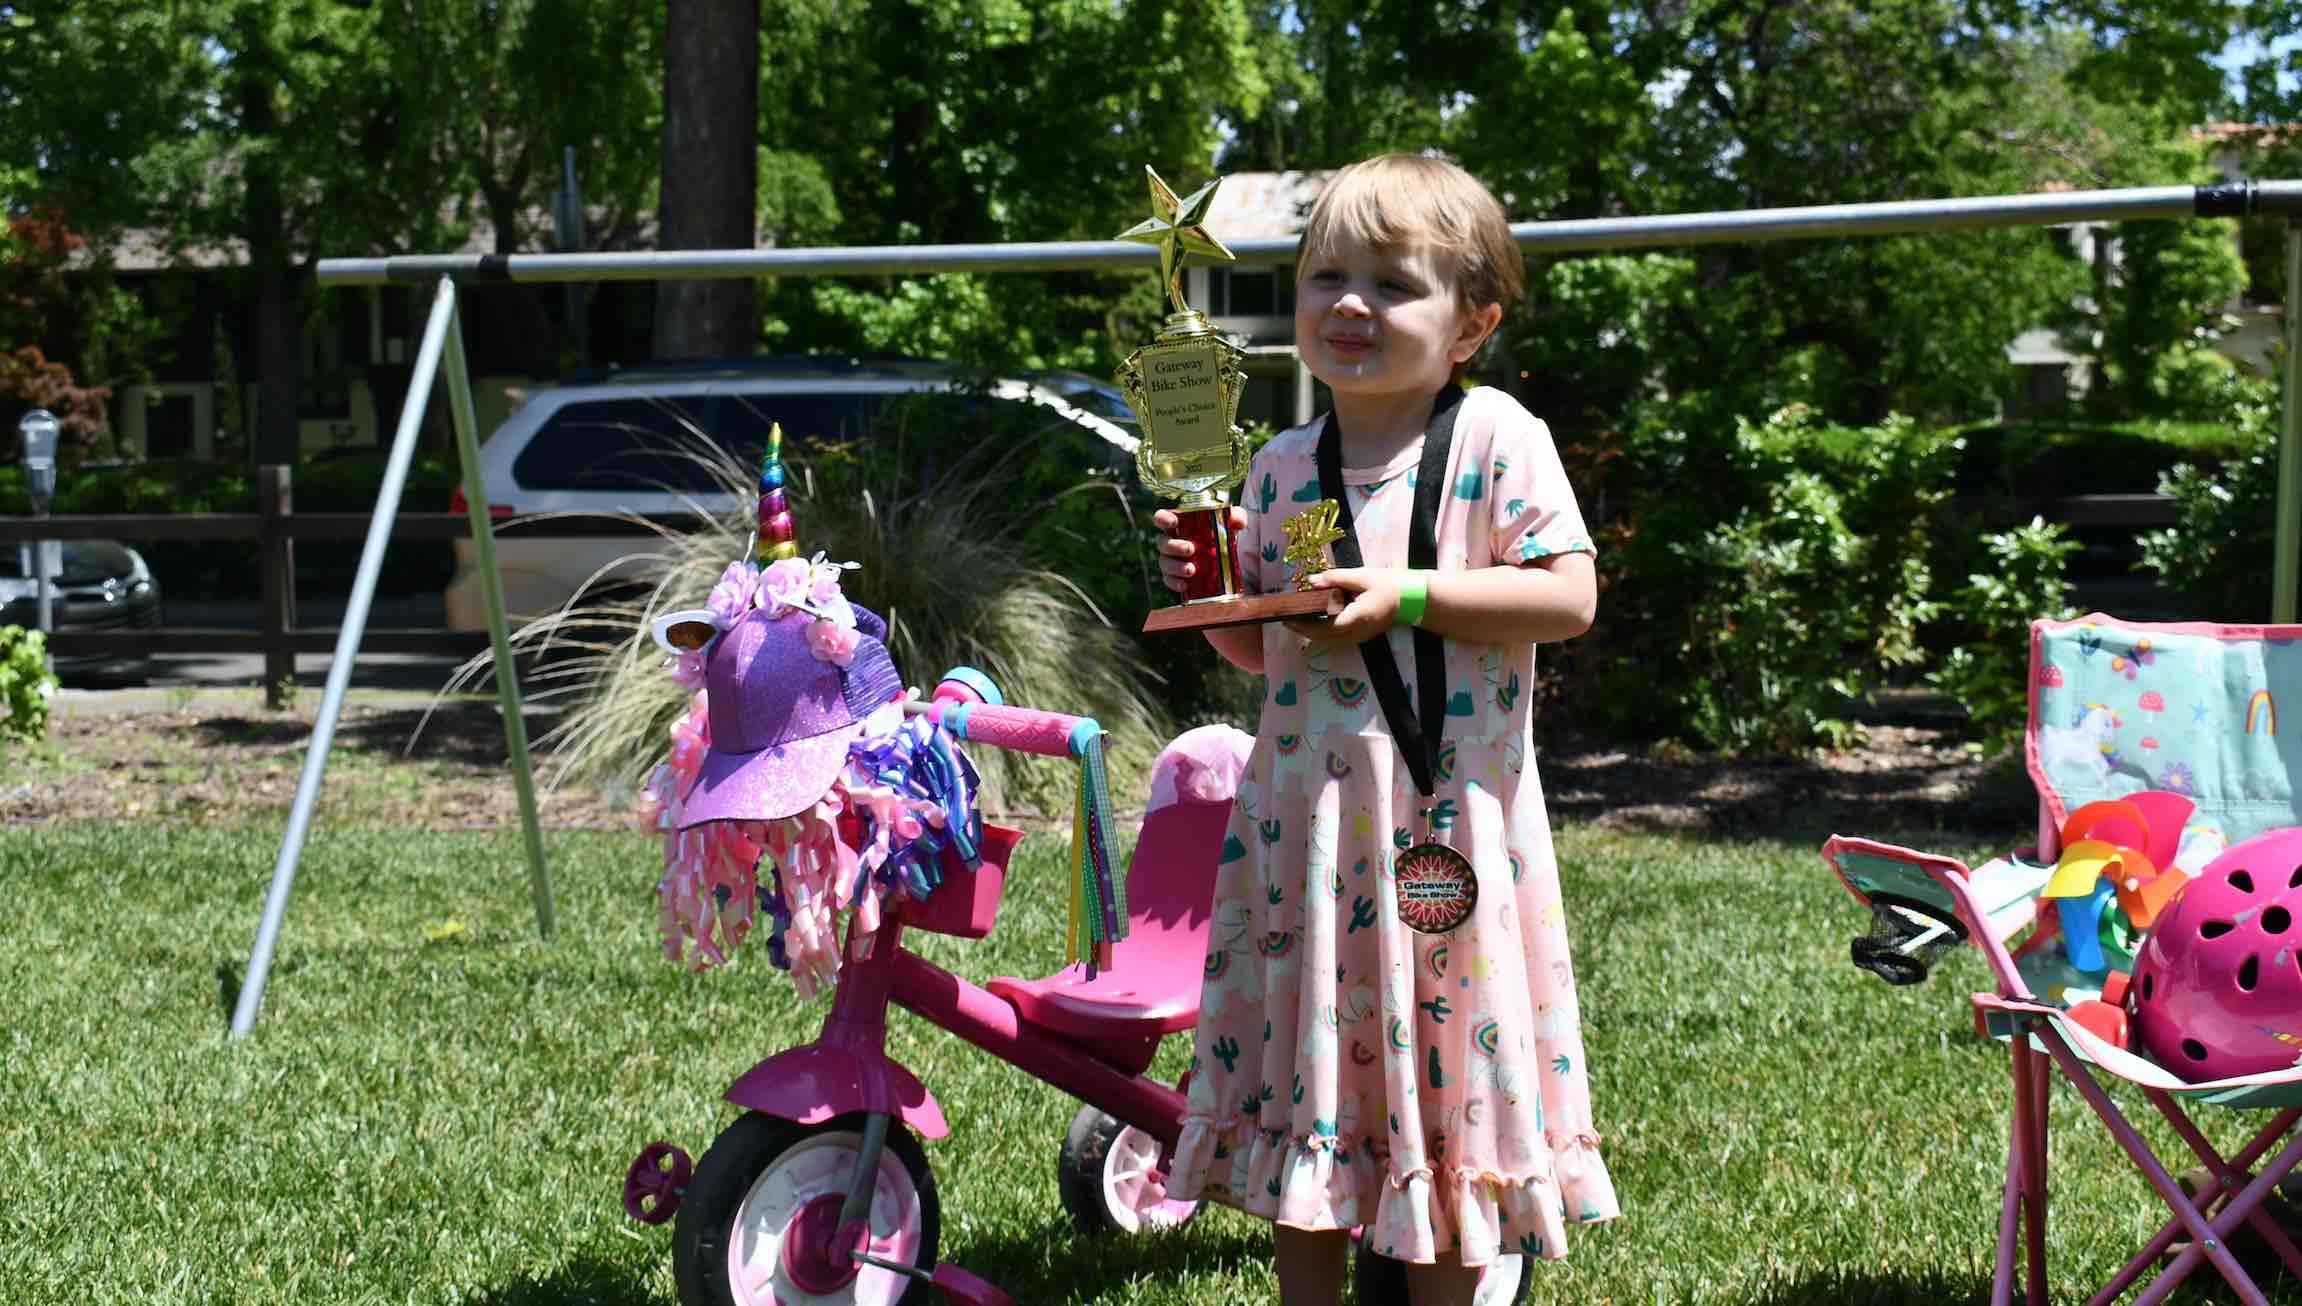 A young child with short blond hair and a pink dress stands next to their pink tricycle. They are holding a trophy